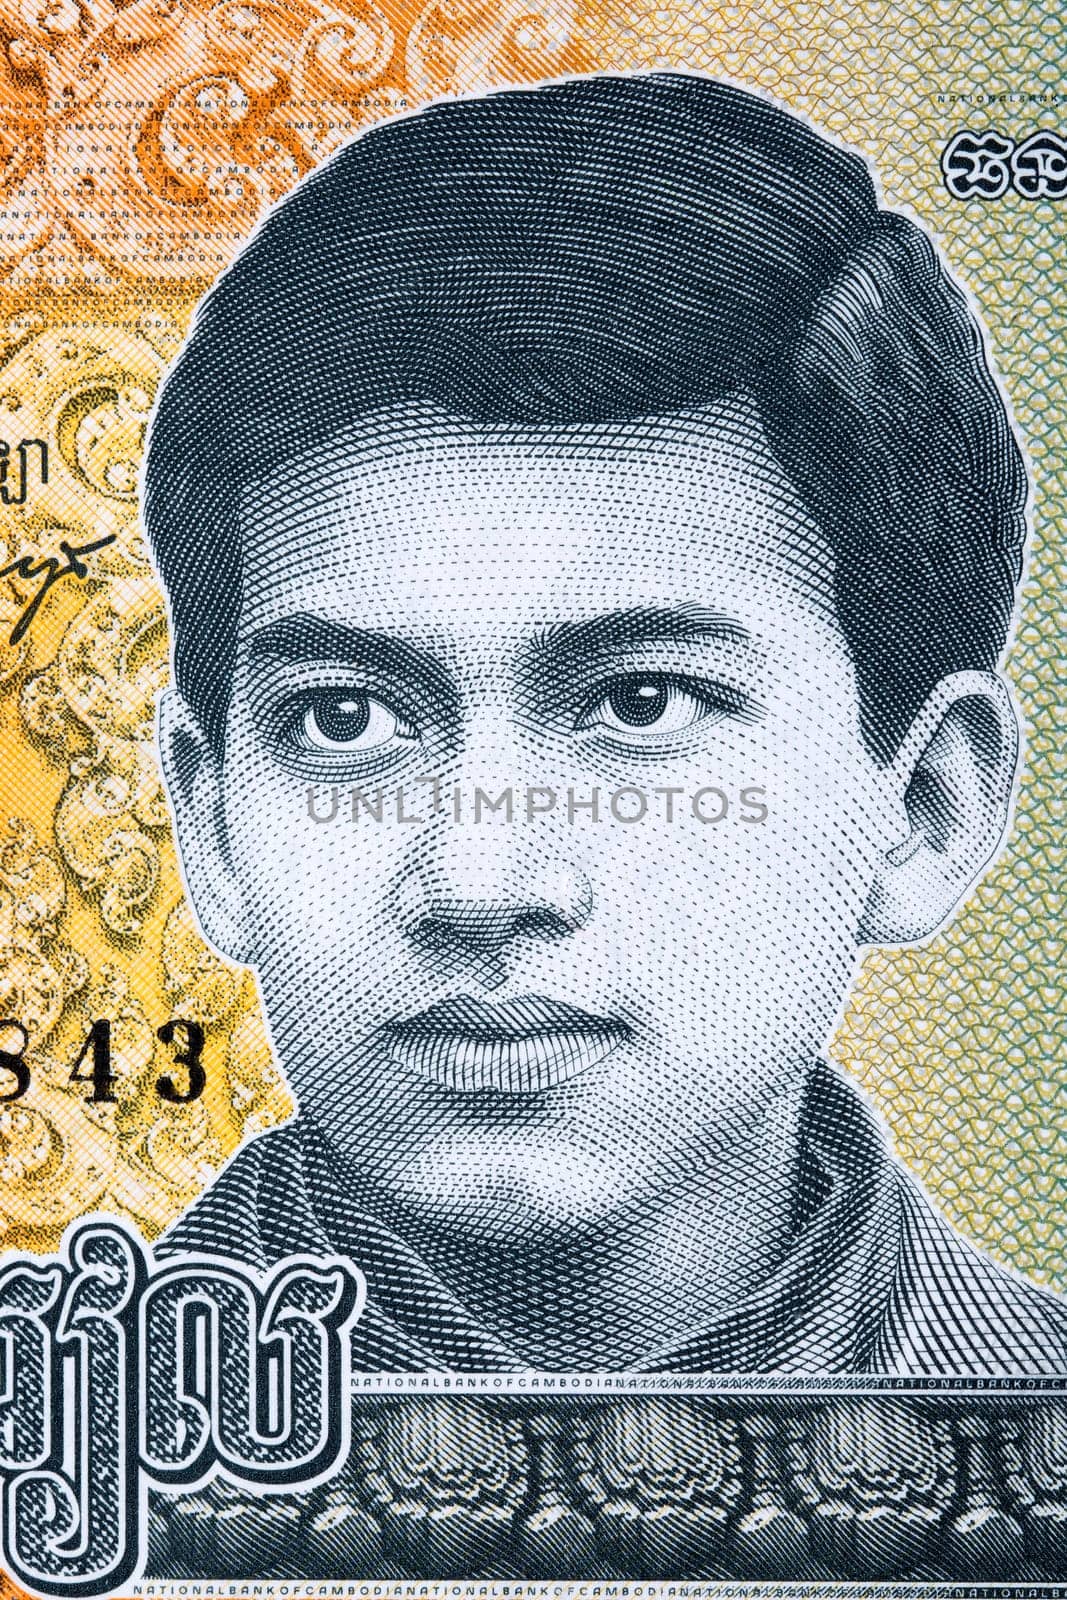 King Norodom Sihamoni as a young man from Cambodian money - 200 riel